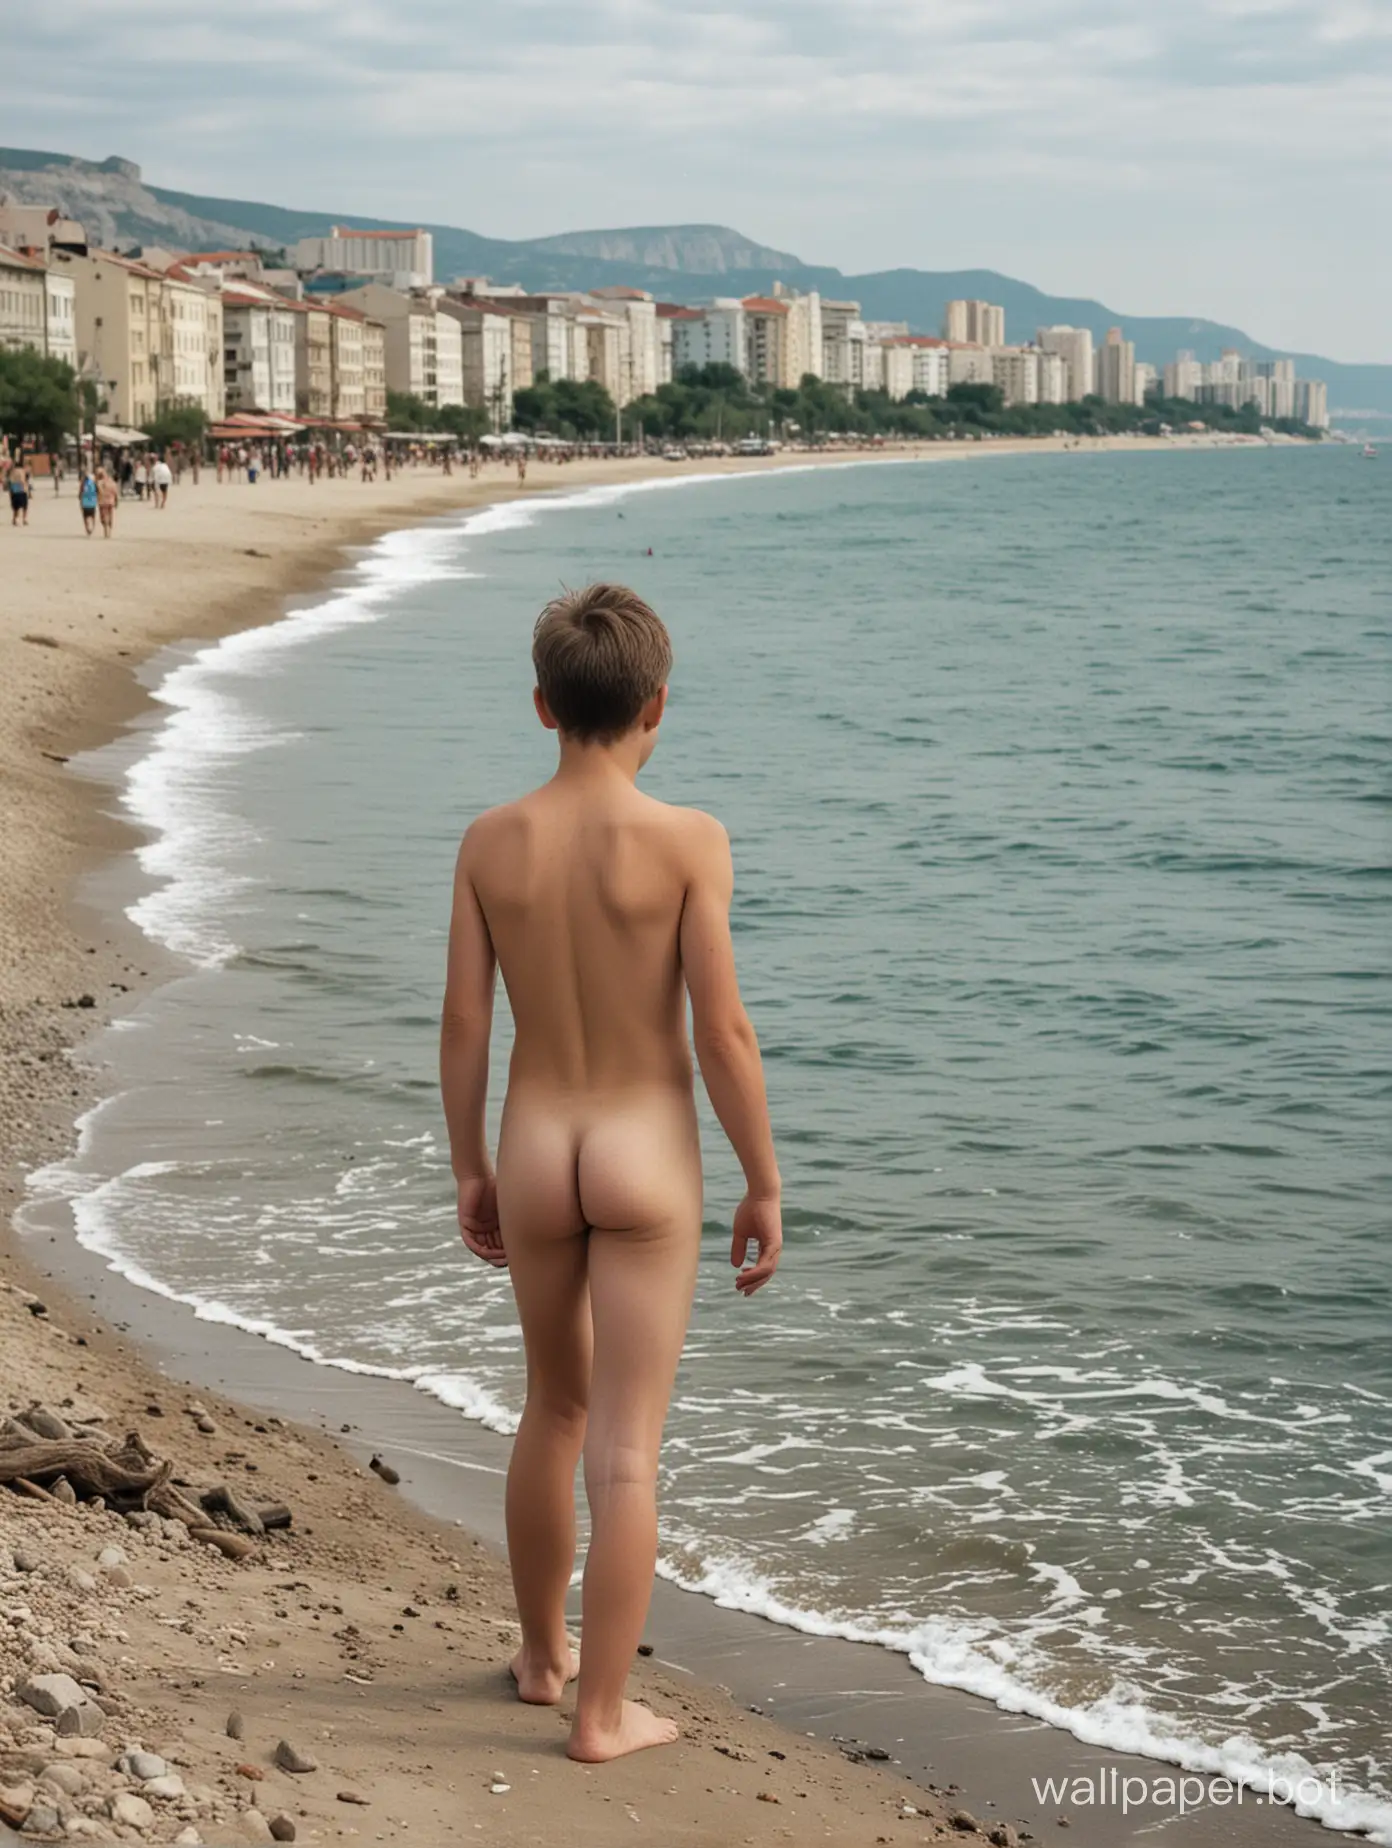 naked Soviet boy 13 years old by the sea, seen from behind, full-length, Crimea, people nearby, buildings in the background, walking along the shore